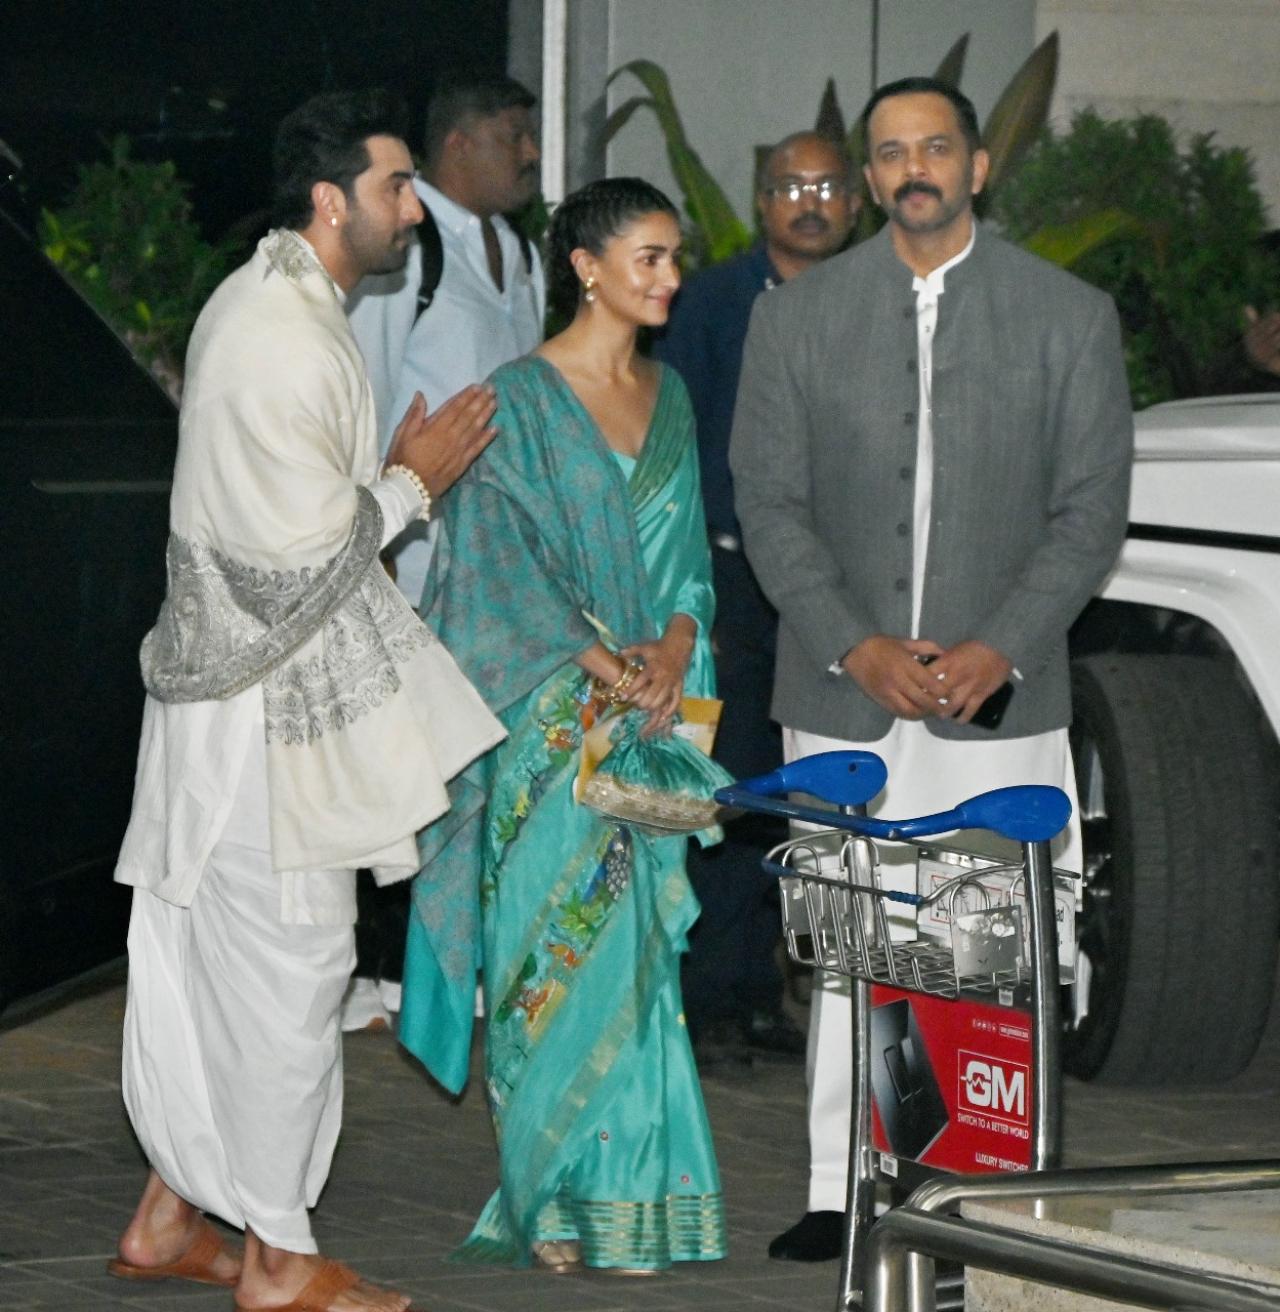 Ranbir Kapoor was accompanied by his wife and actress Alia Bhatt. The 'Highway' star wore a simple peacock green saree for the occasion. The couple was accompanied by director Rohit Shetty